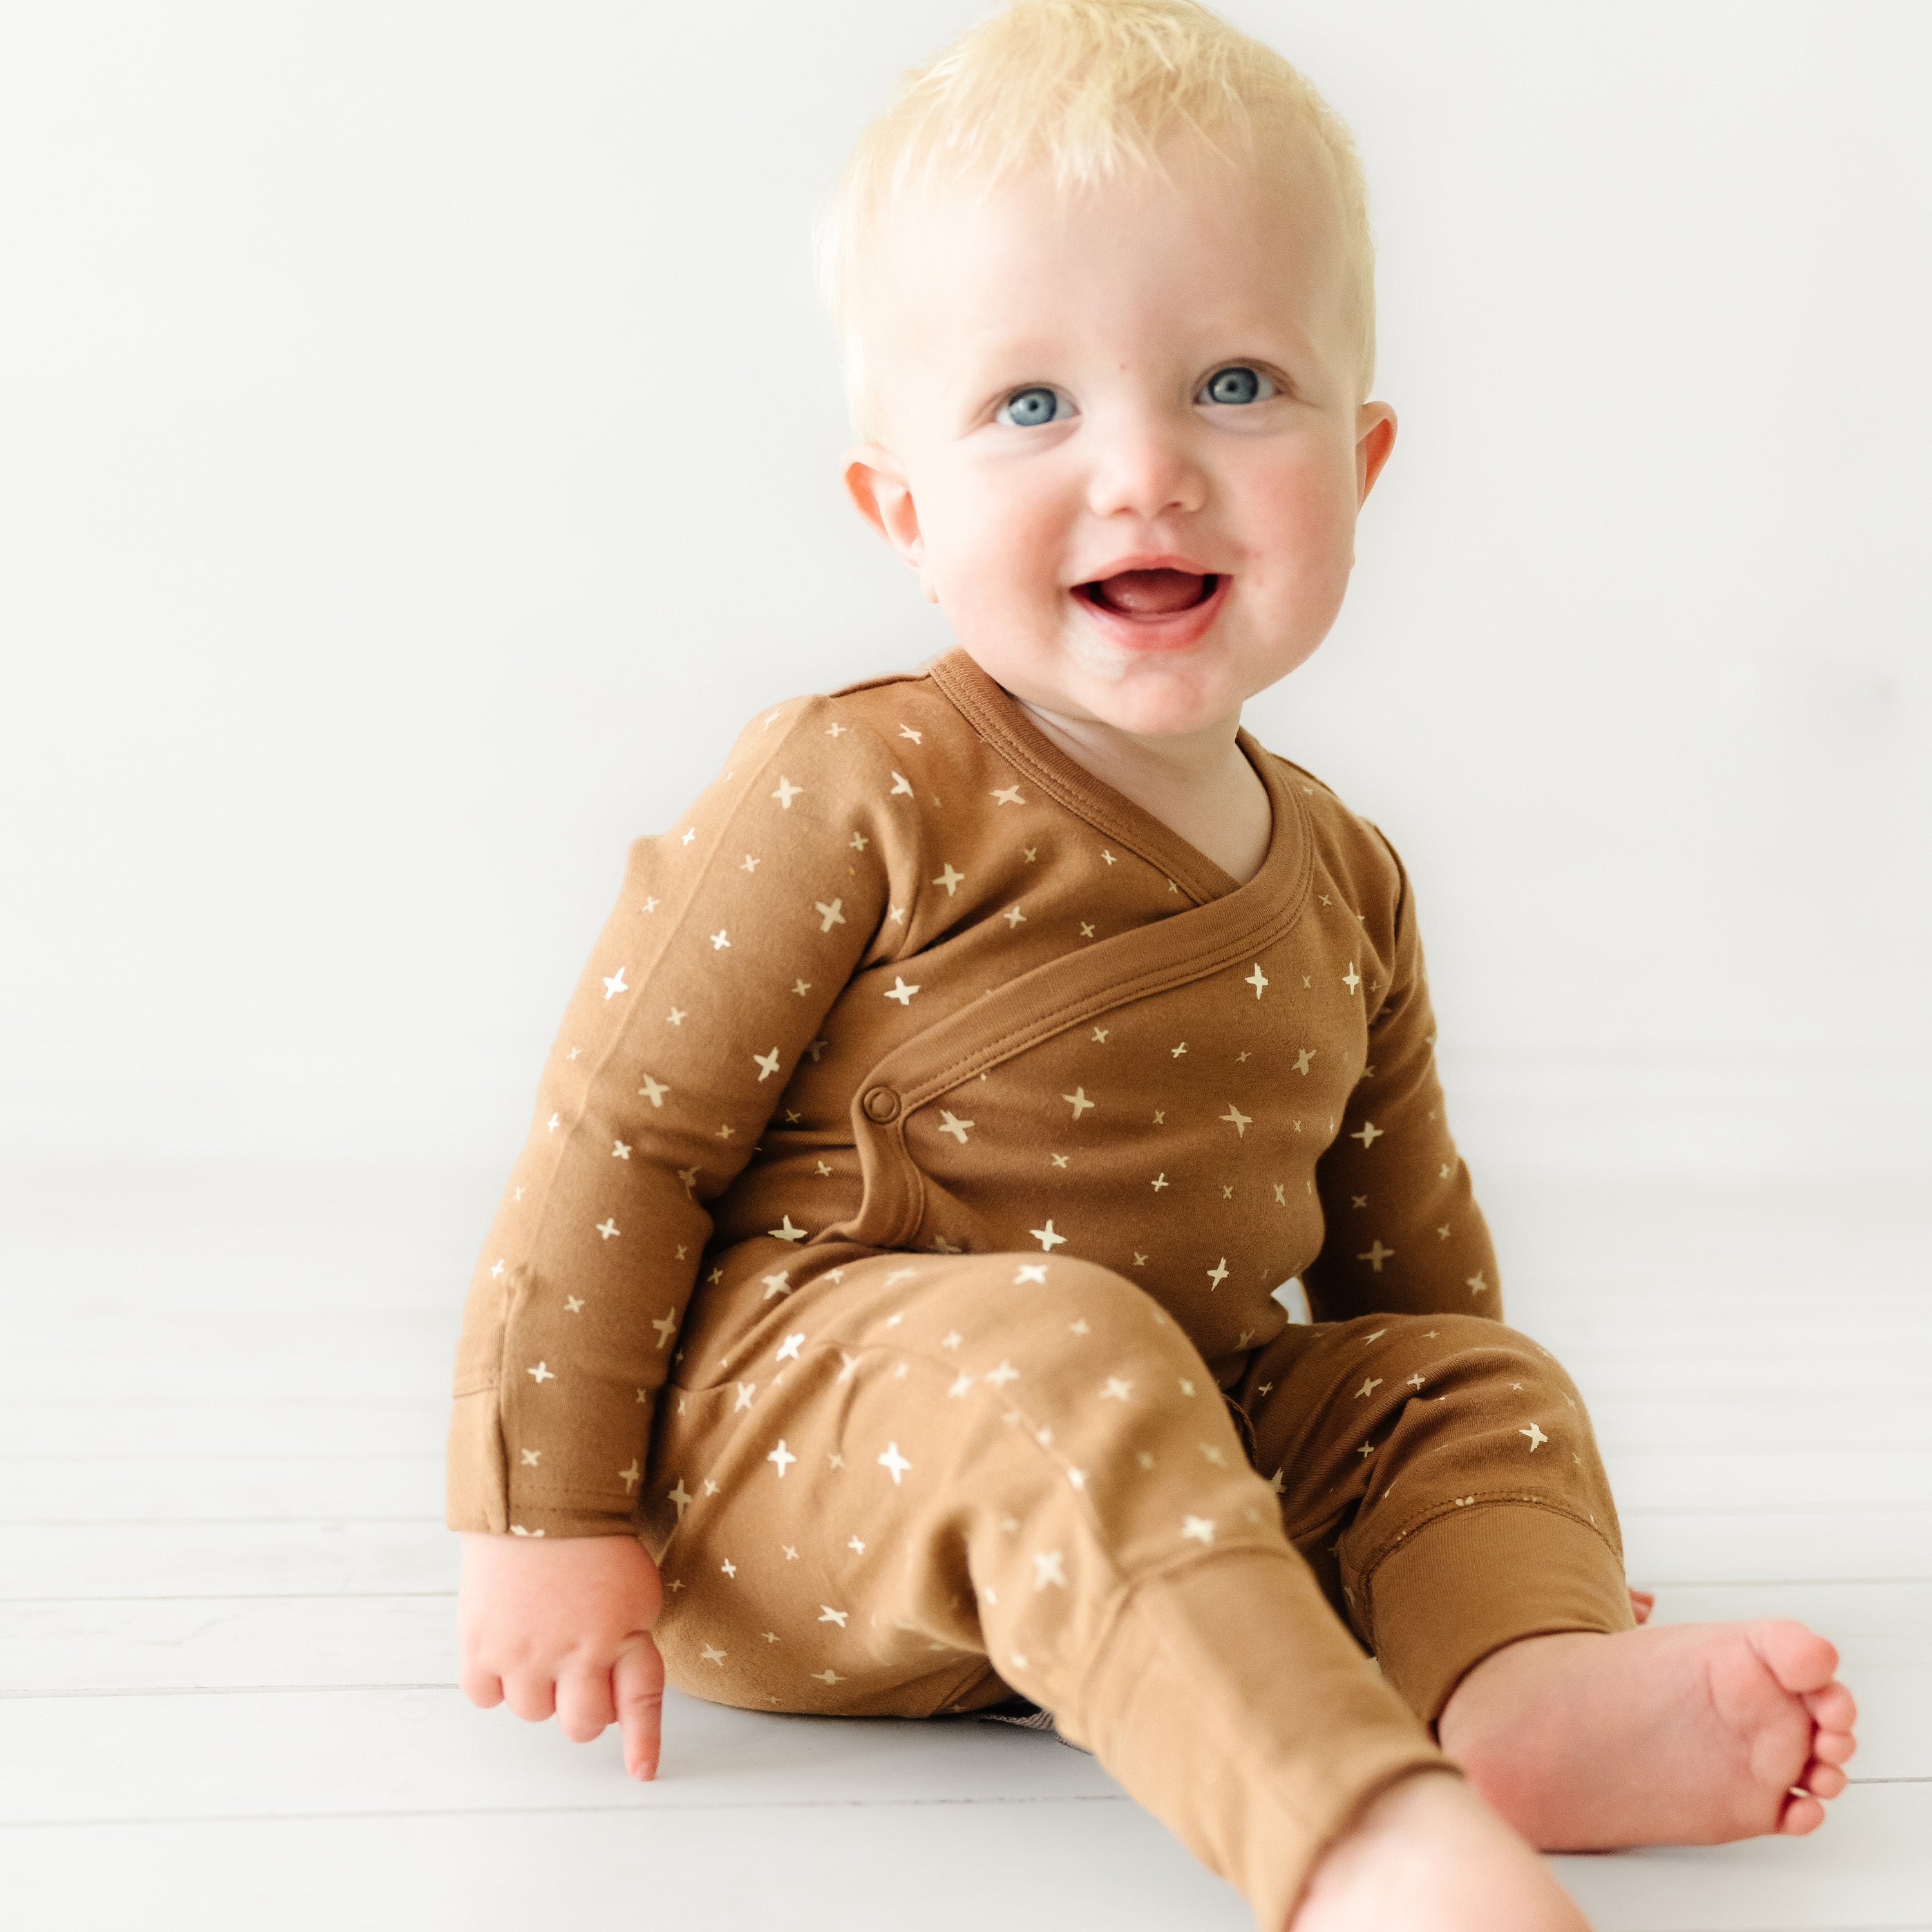 A joyful blonde baby with blue eyes wearing an Organic Baby brown kimono onesie and pants set decorated with stars, sitting on a white floor and smiling.